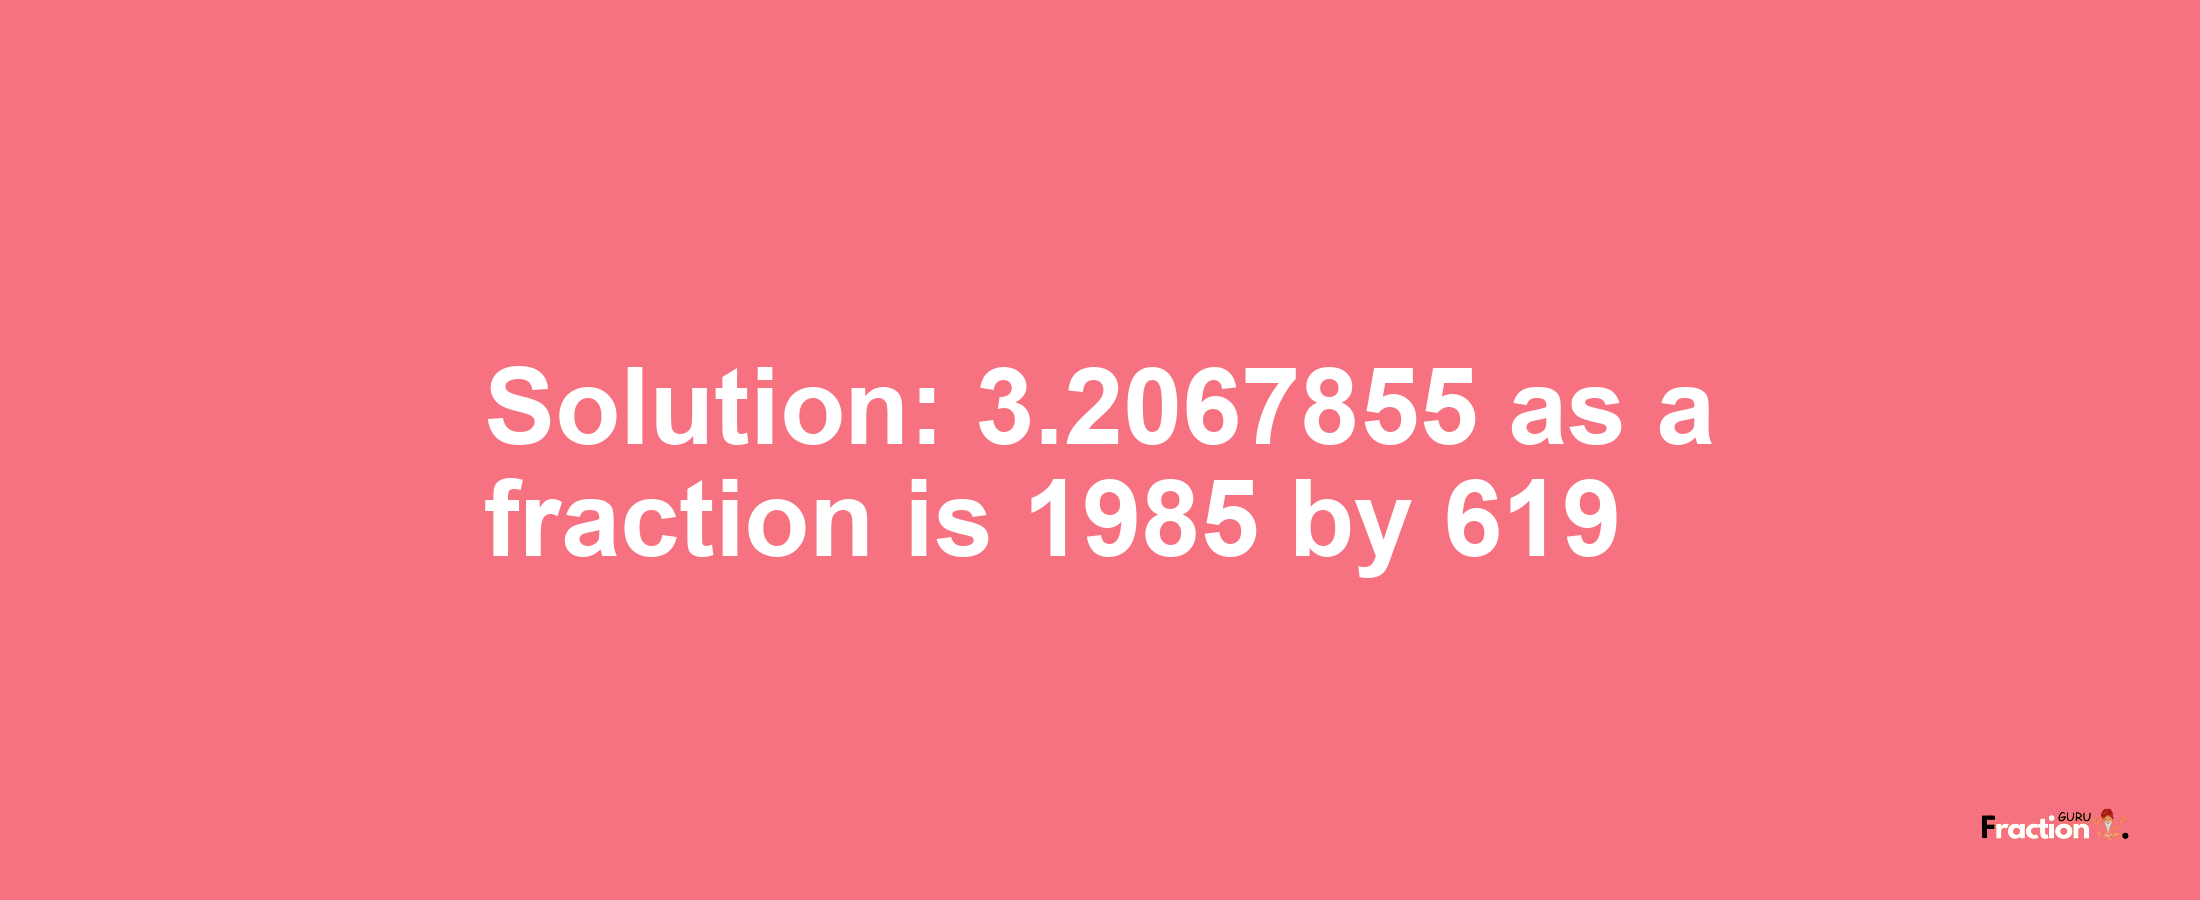 Solution:3.2067855 as a fraction is 1985/619